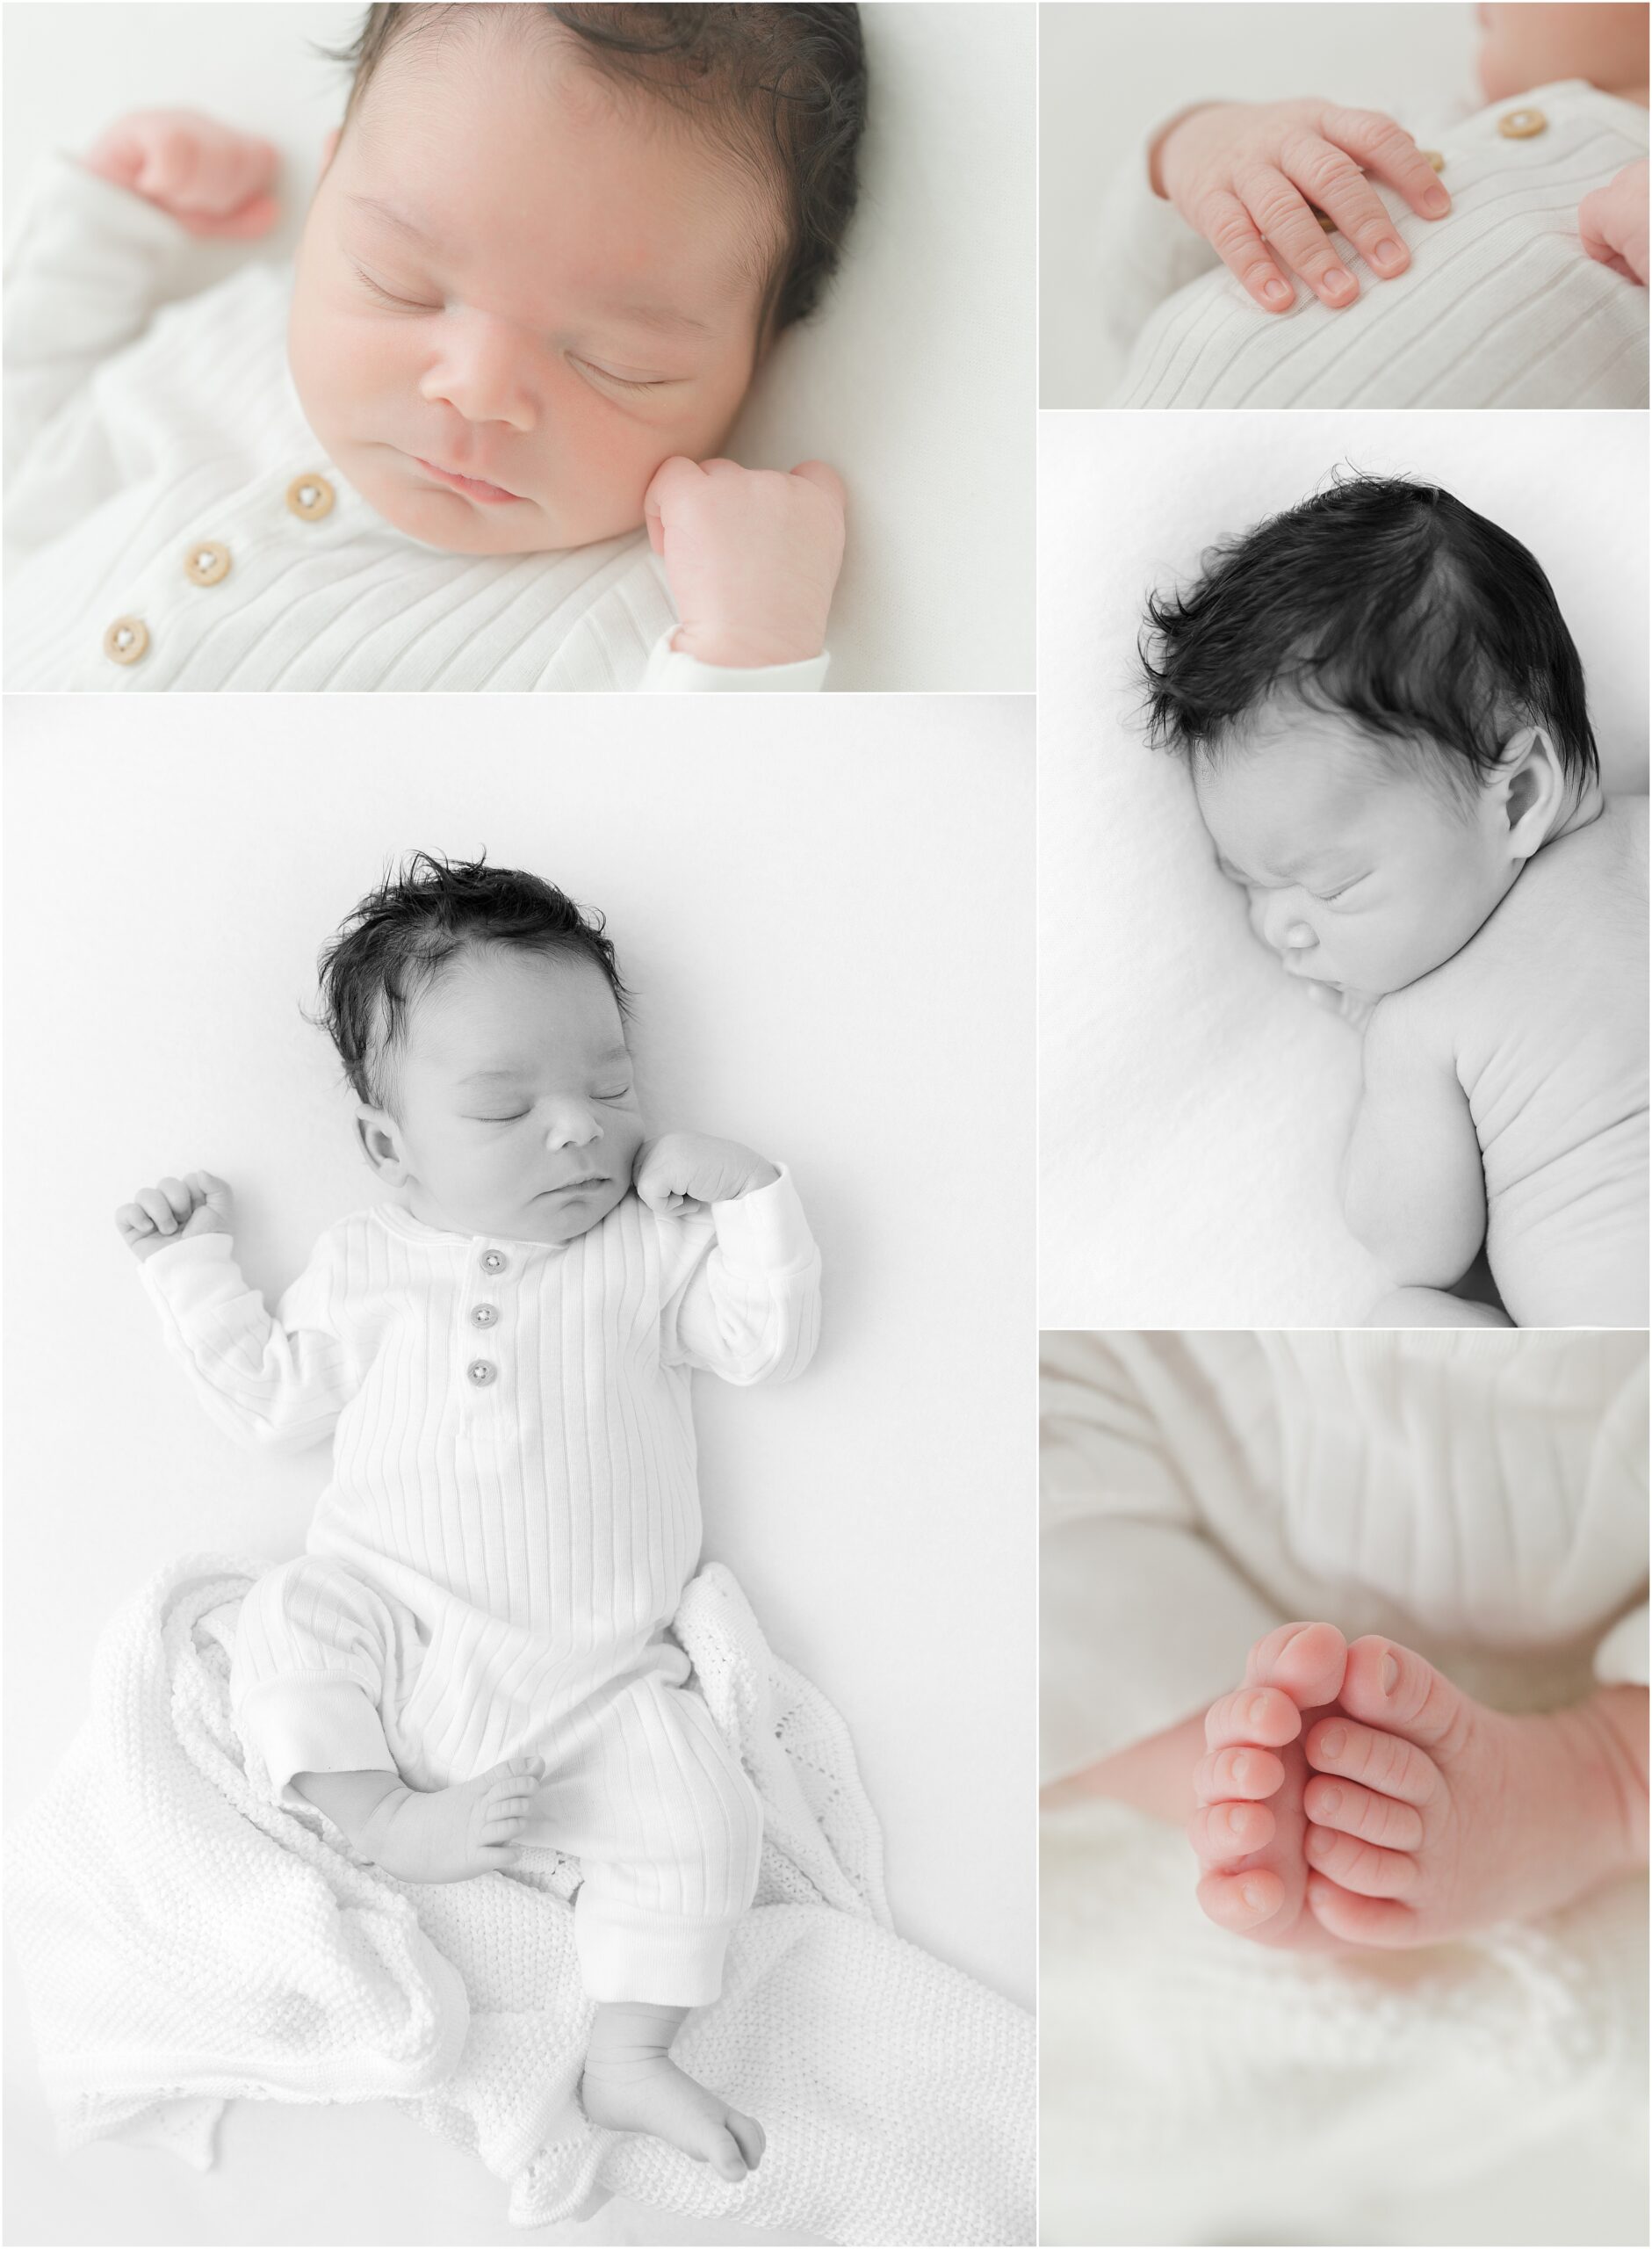 Photo collage of a newborn baby boy with black hair wearing a white sleeper outfit